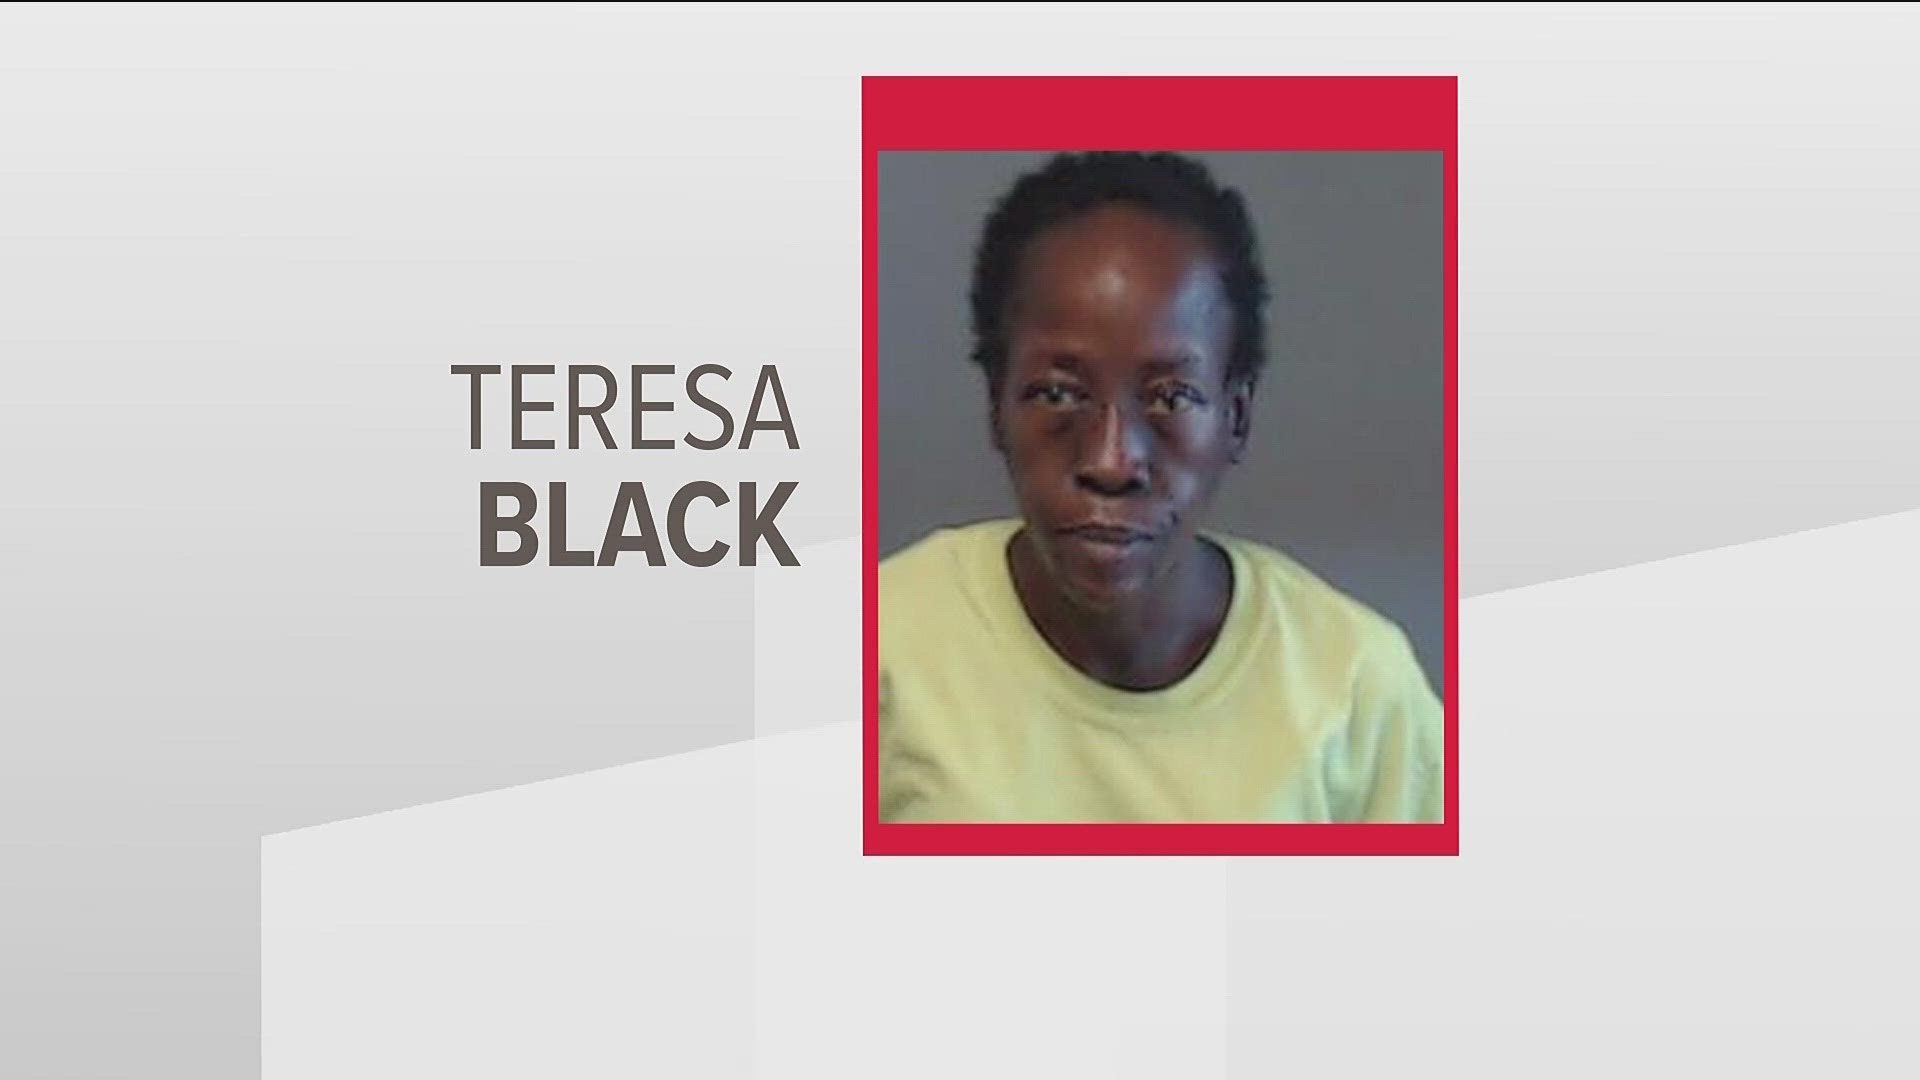 Nearly 25 years later, a trial date for Teresa Black has been set for Tuesday, Jan. 2.